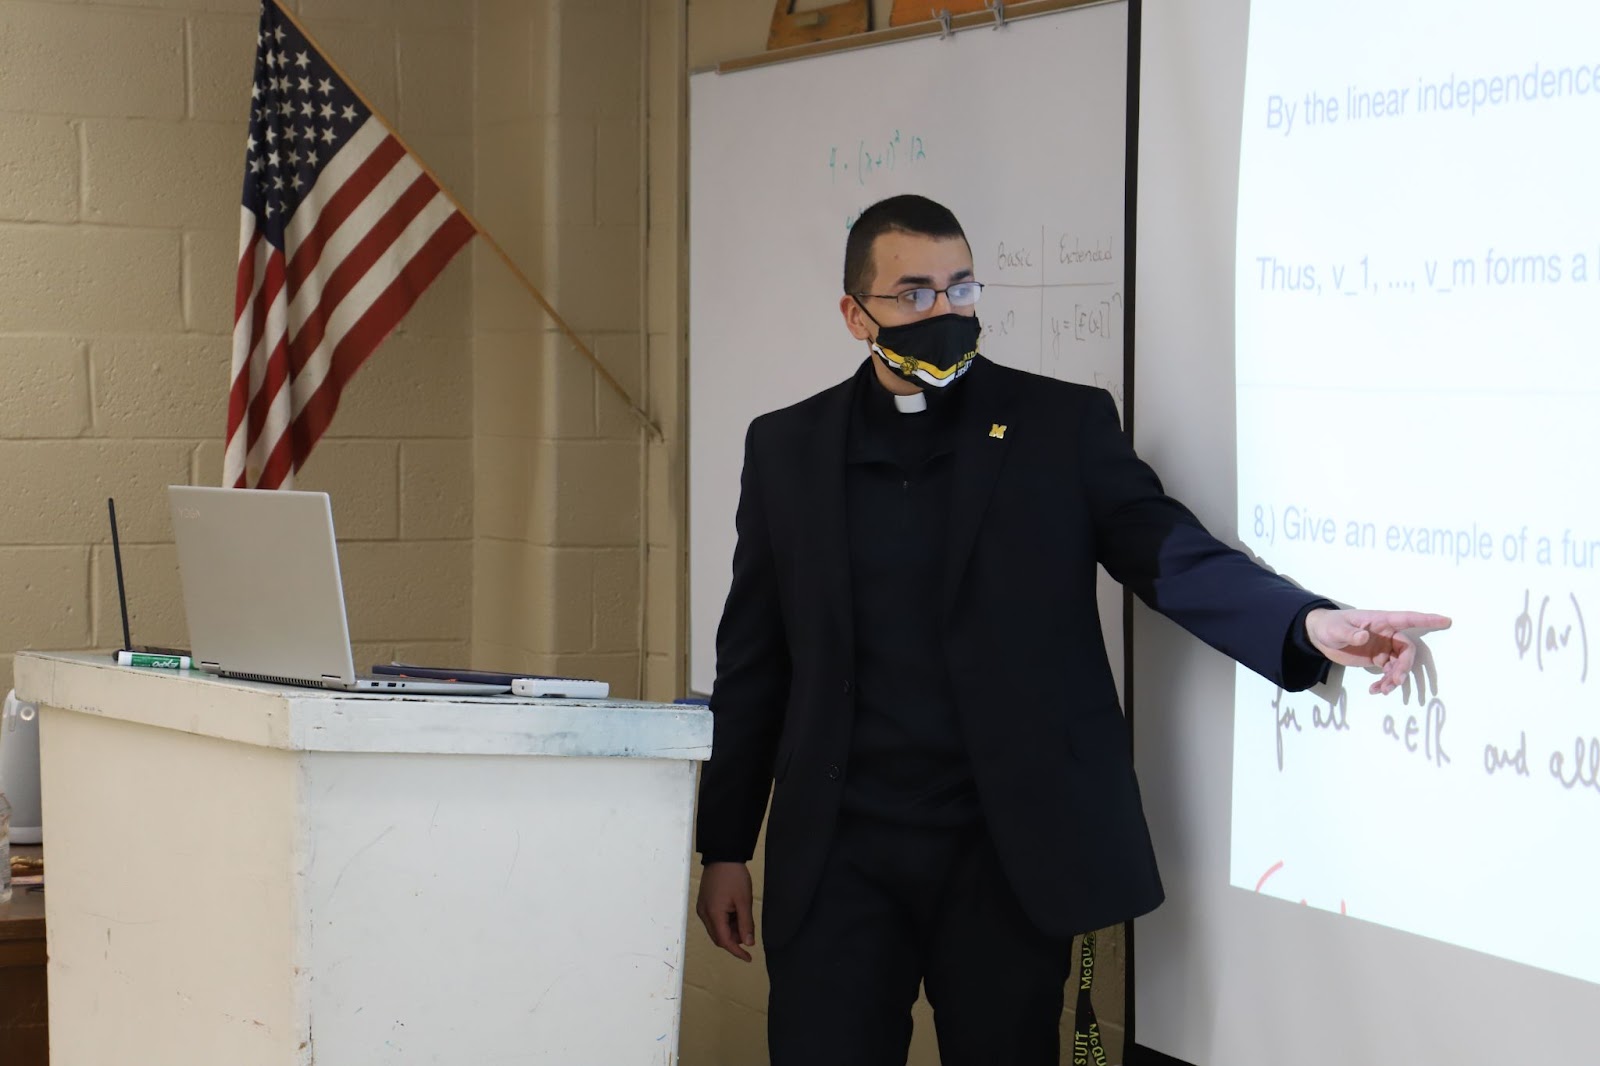 Christian Verghese points to a projection while teaching in a classroom in front of an American flag